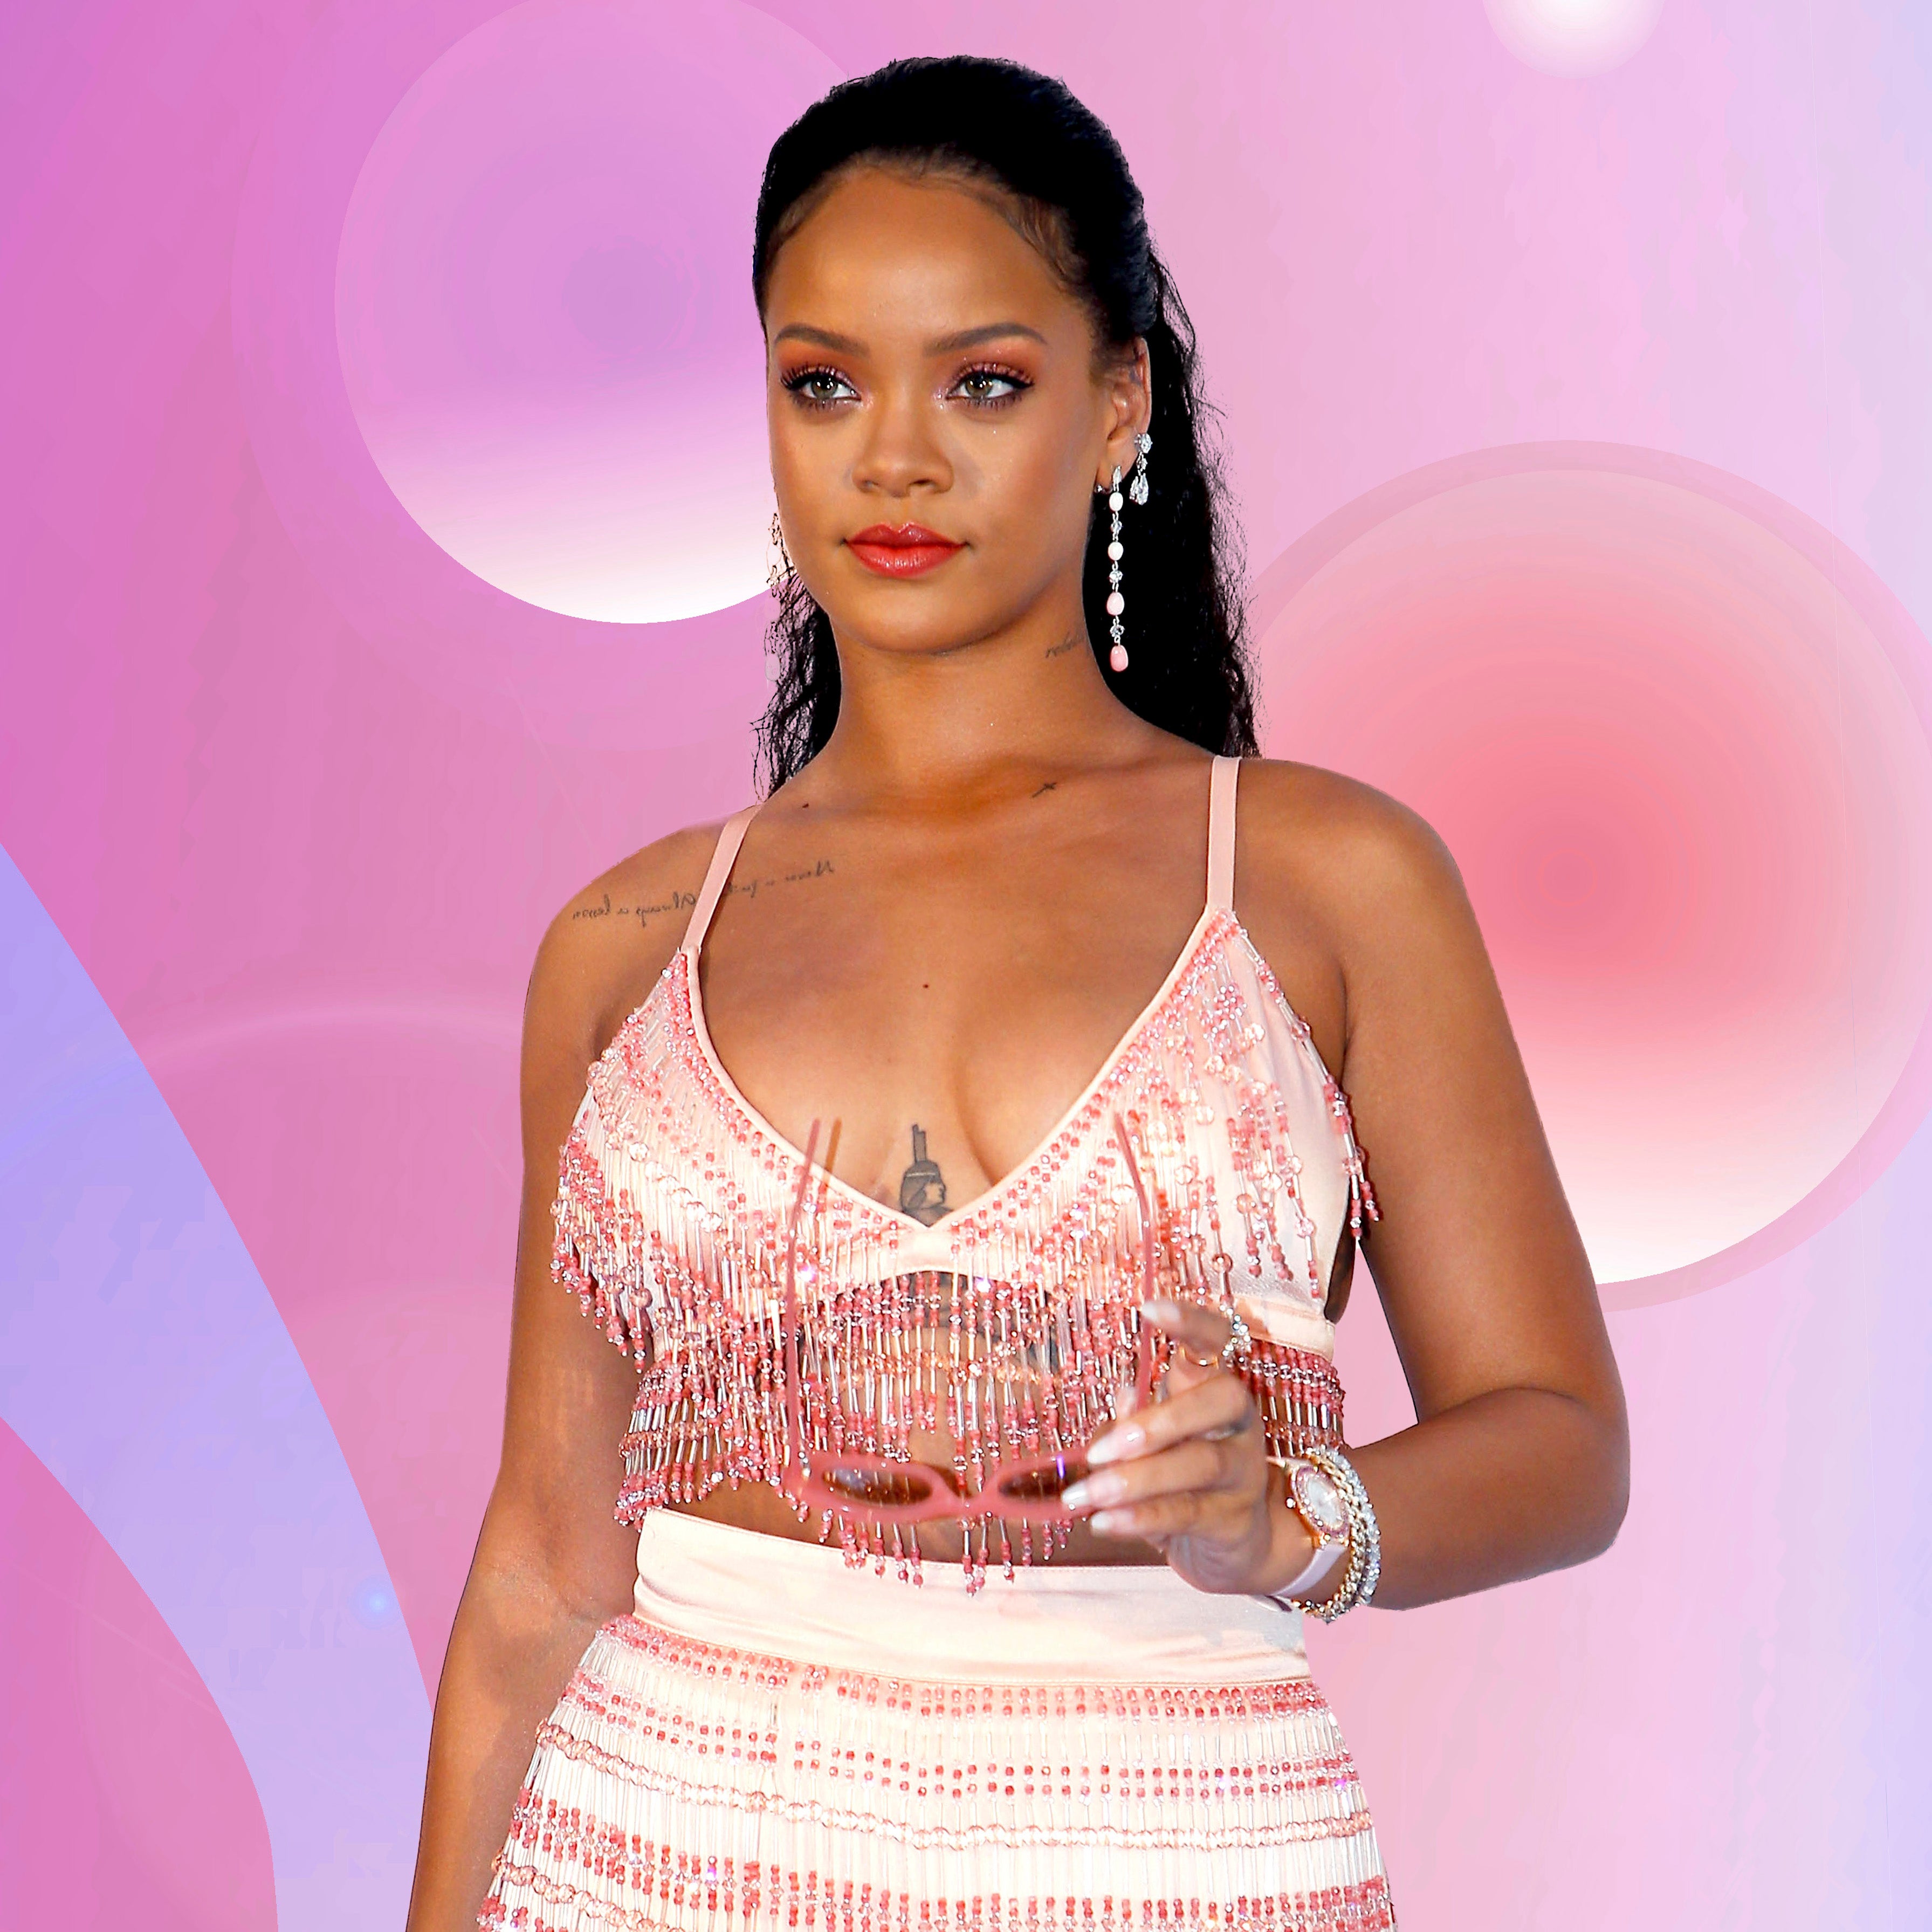 Rihanna Calls Out Trump Over Puerto Rico Negligence - 'Don't Let Your People Die'
